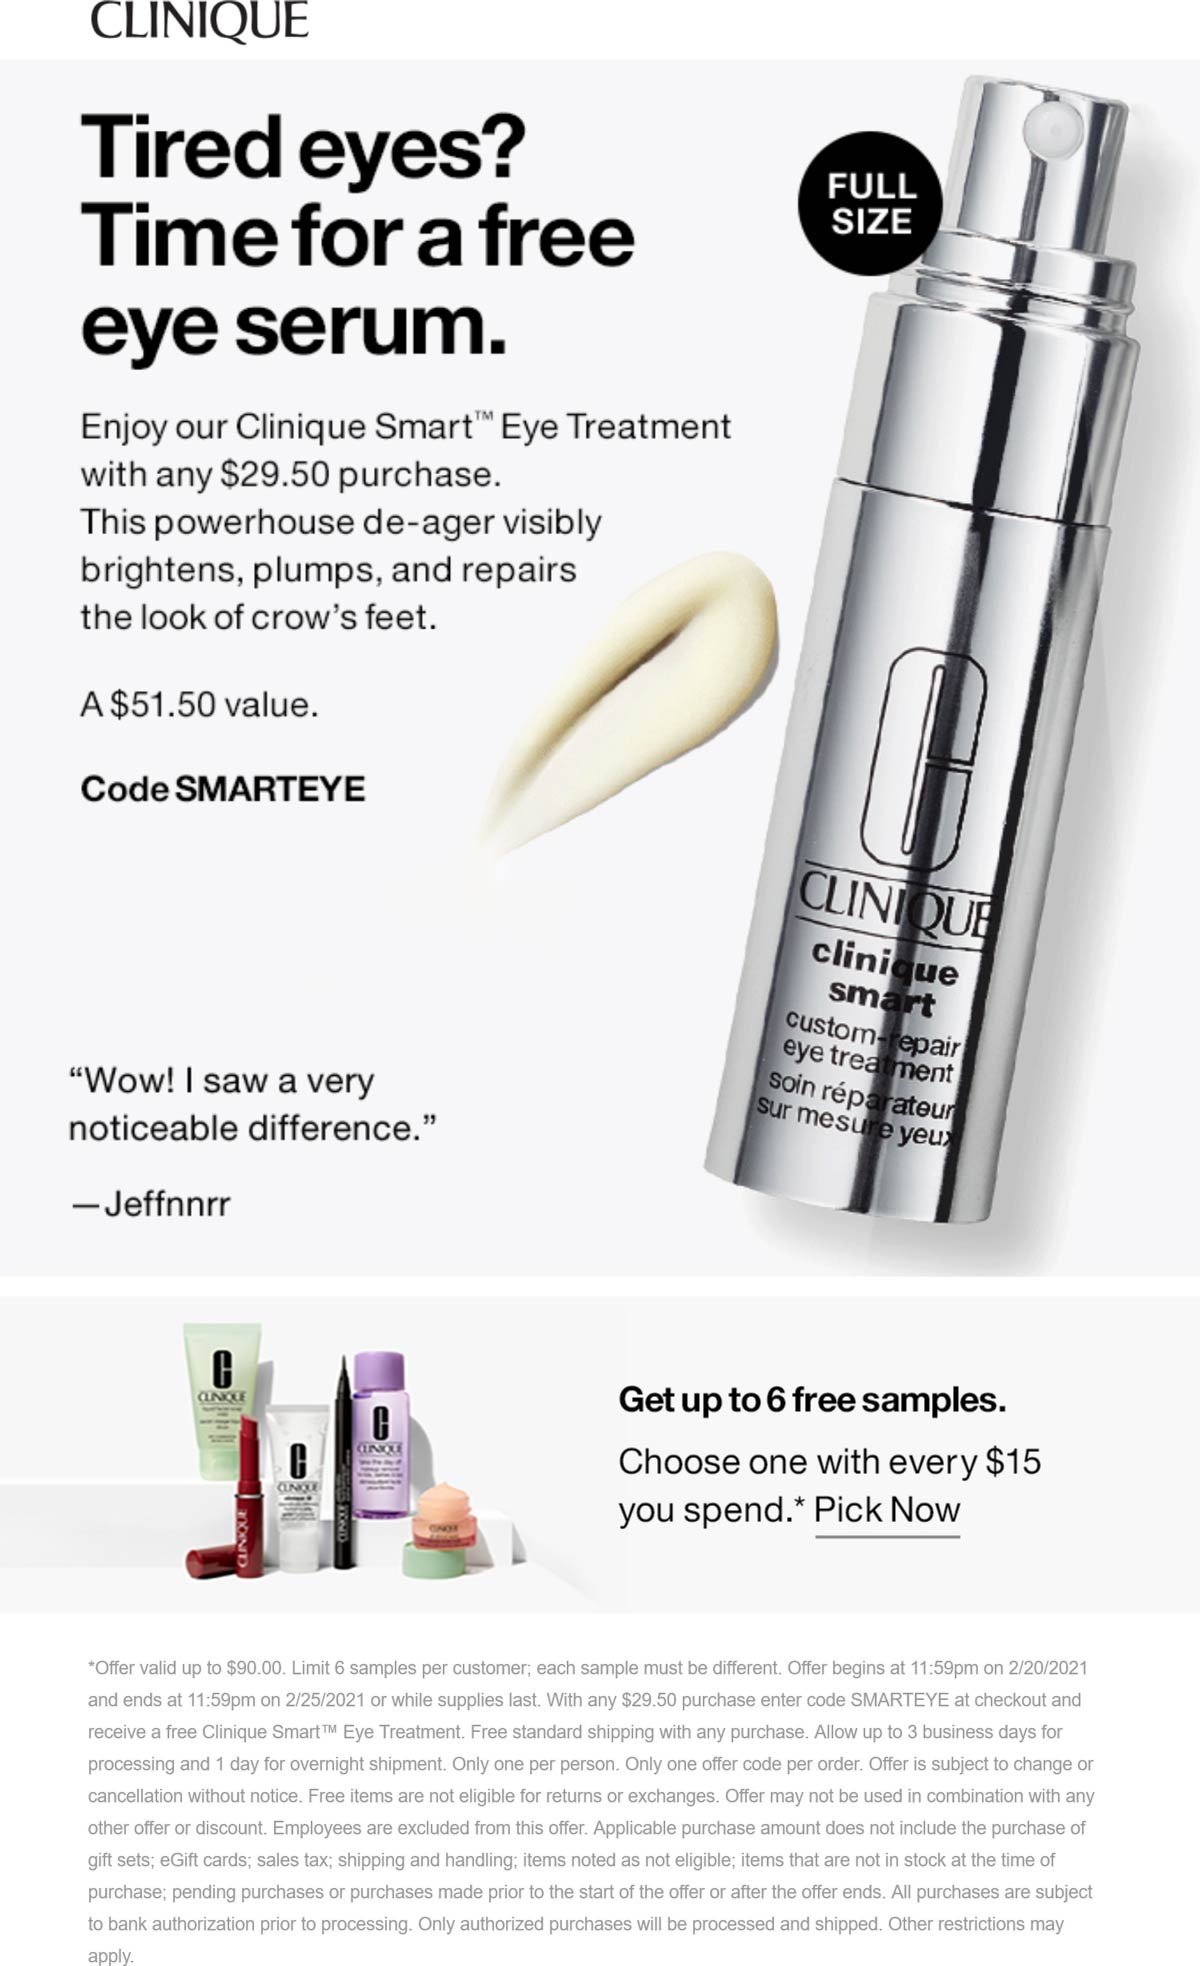 Clinique stores Coupon  Free $50 full size eye treatment with $30 spent today at Clinique via promo code SMARTEYE #clinique 